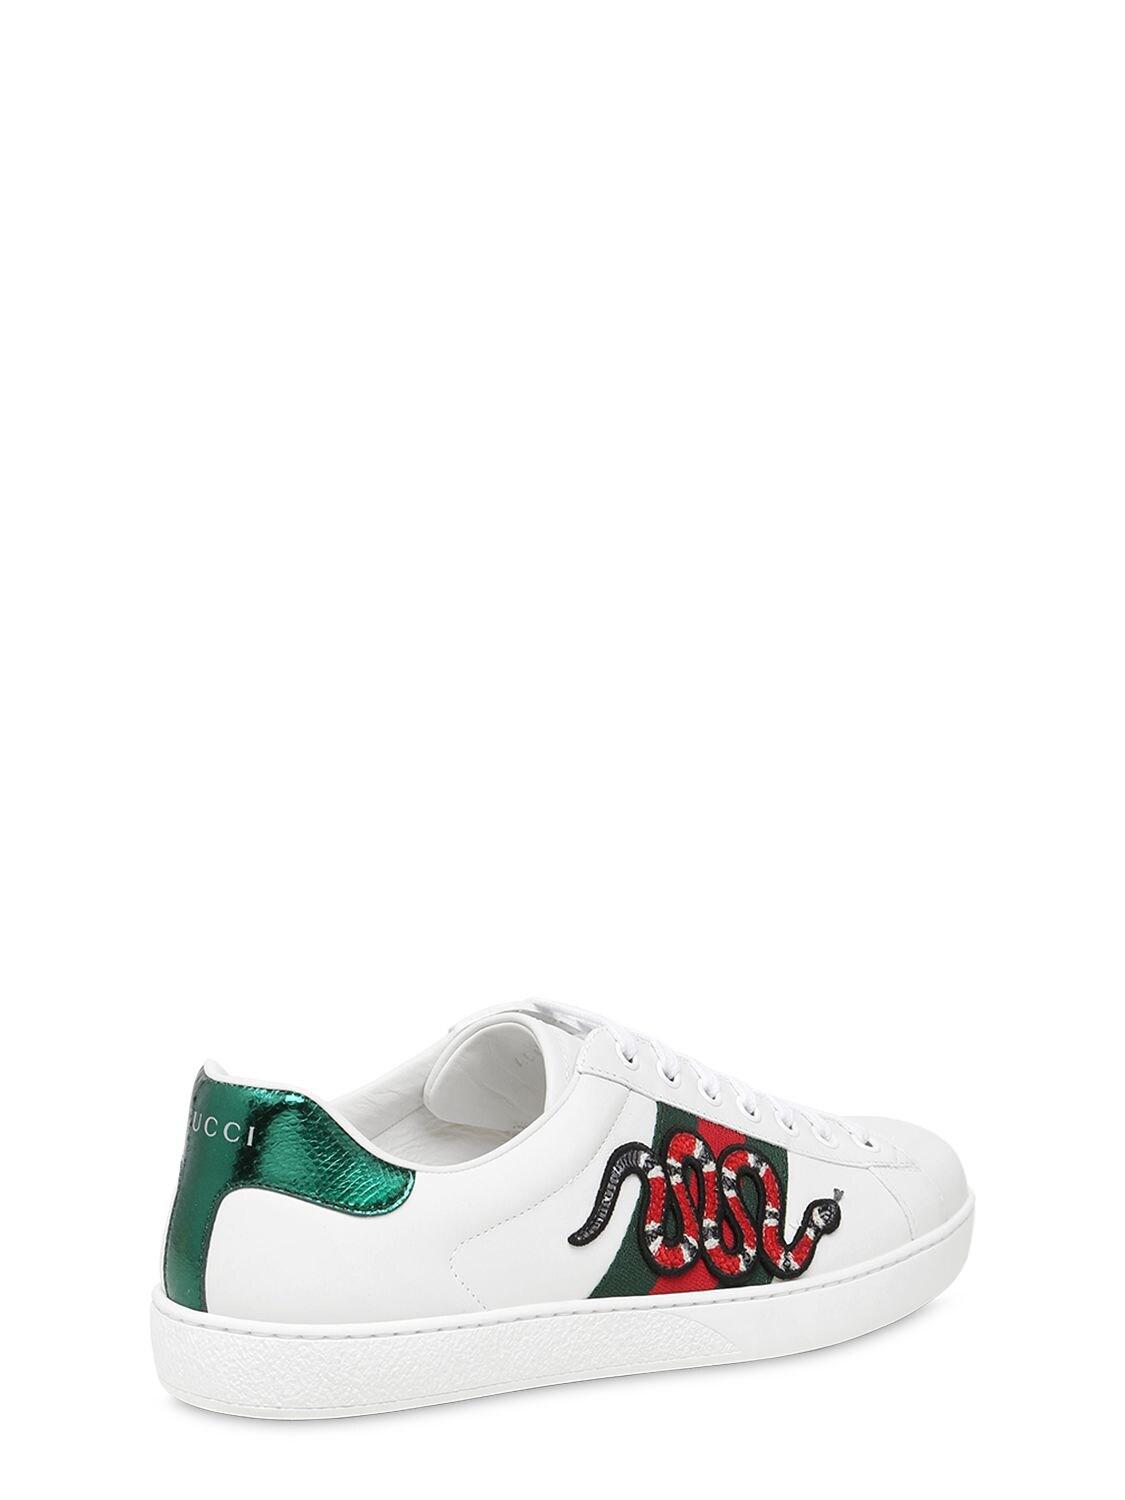 gucci white snake shoes